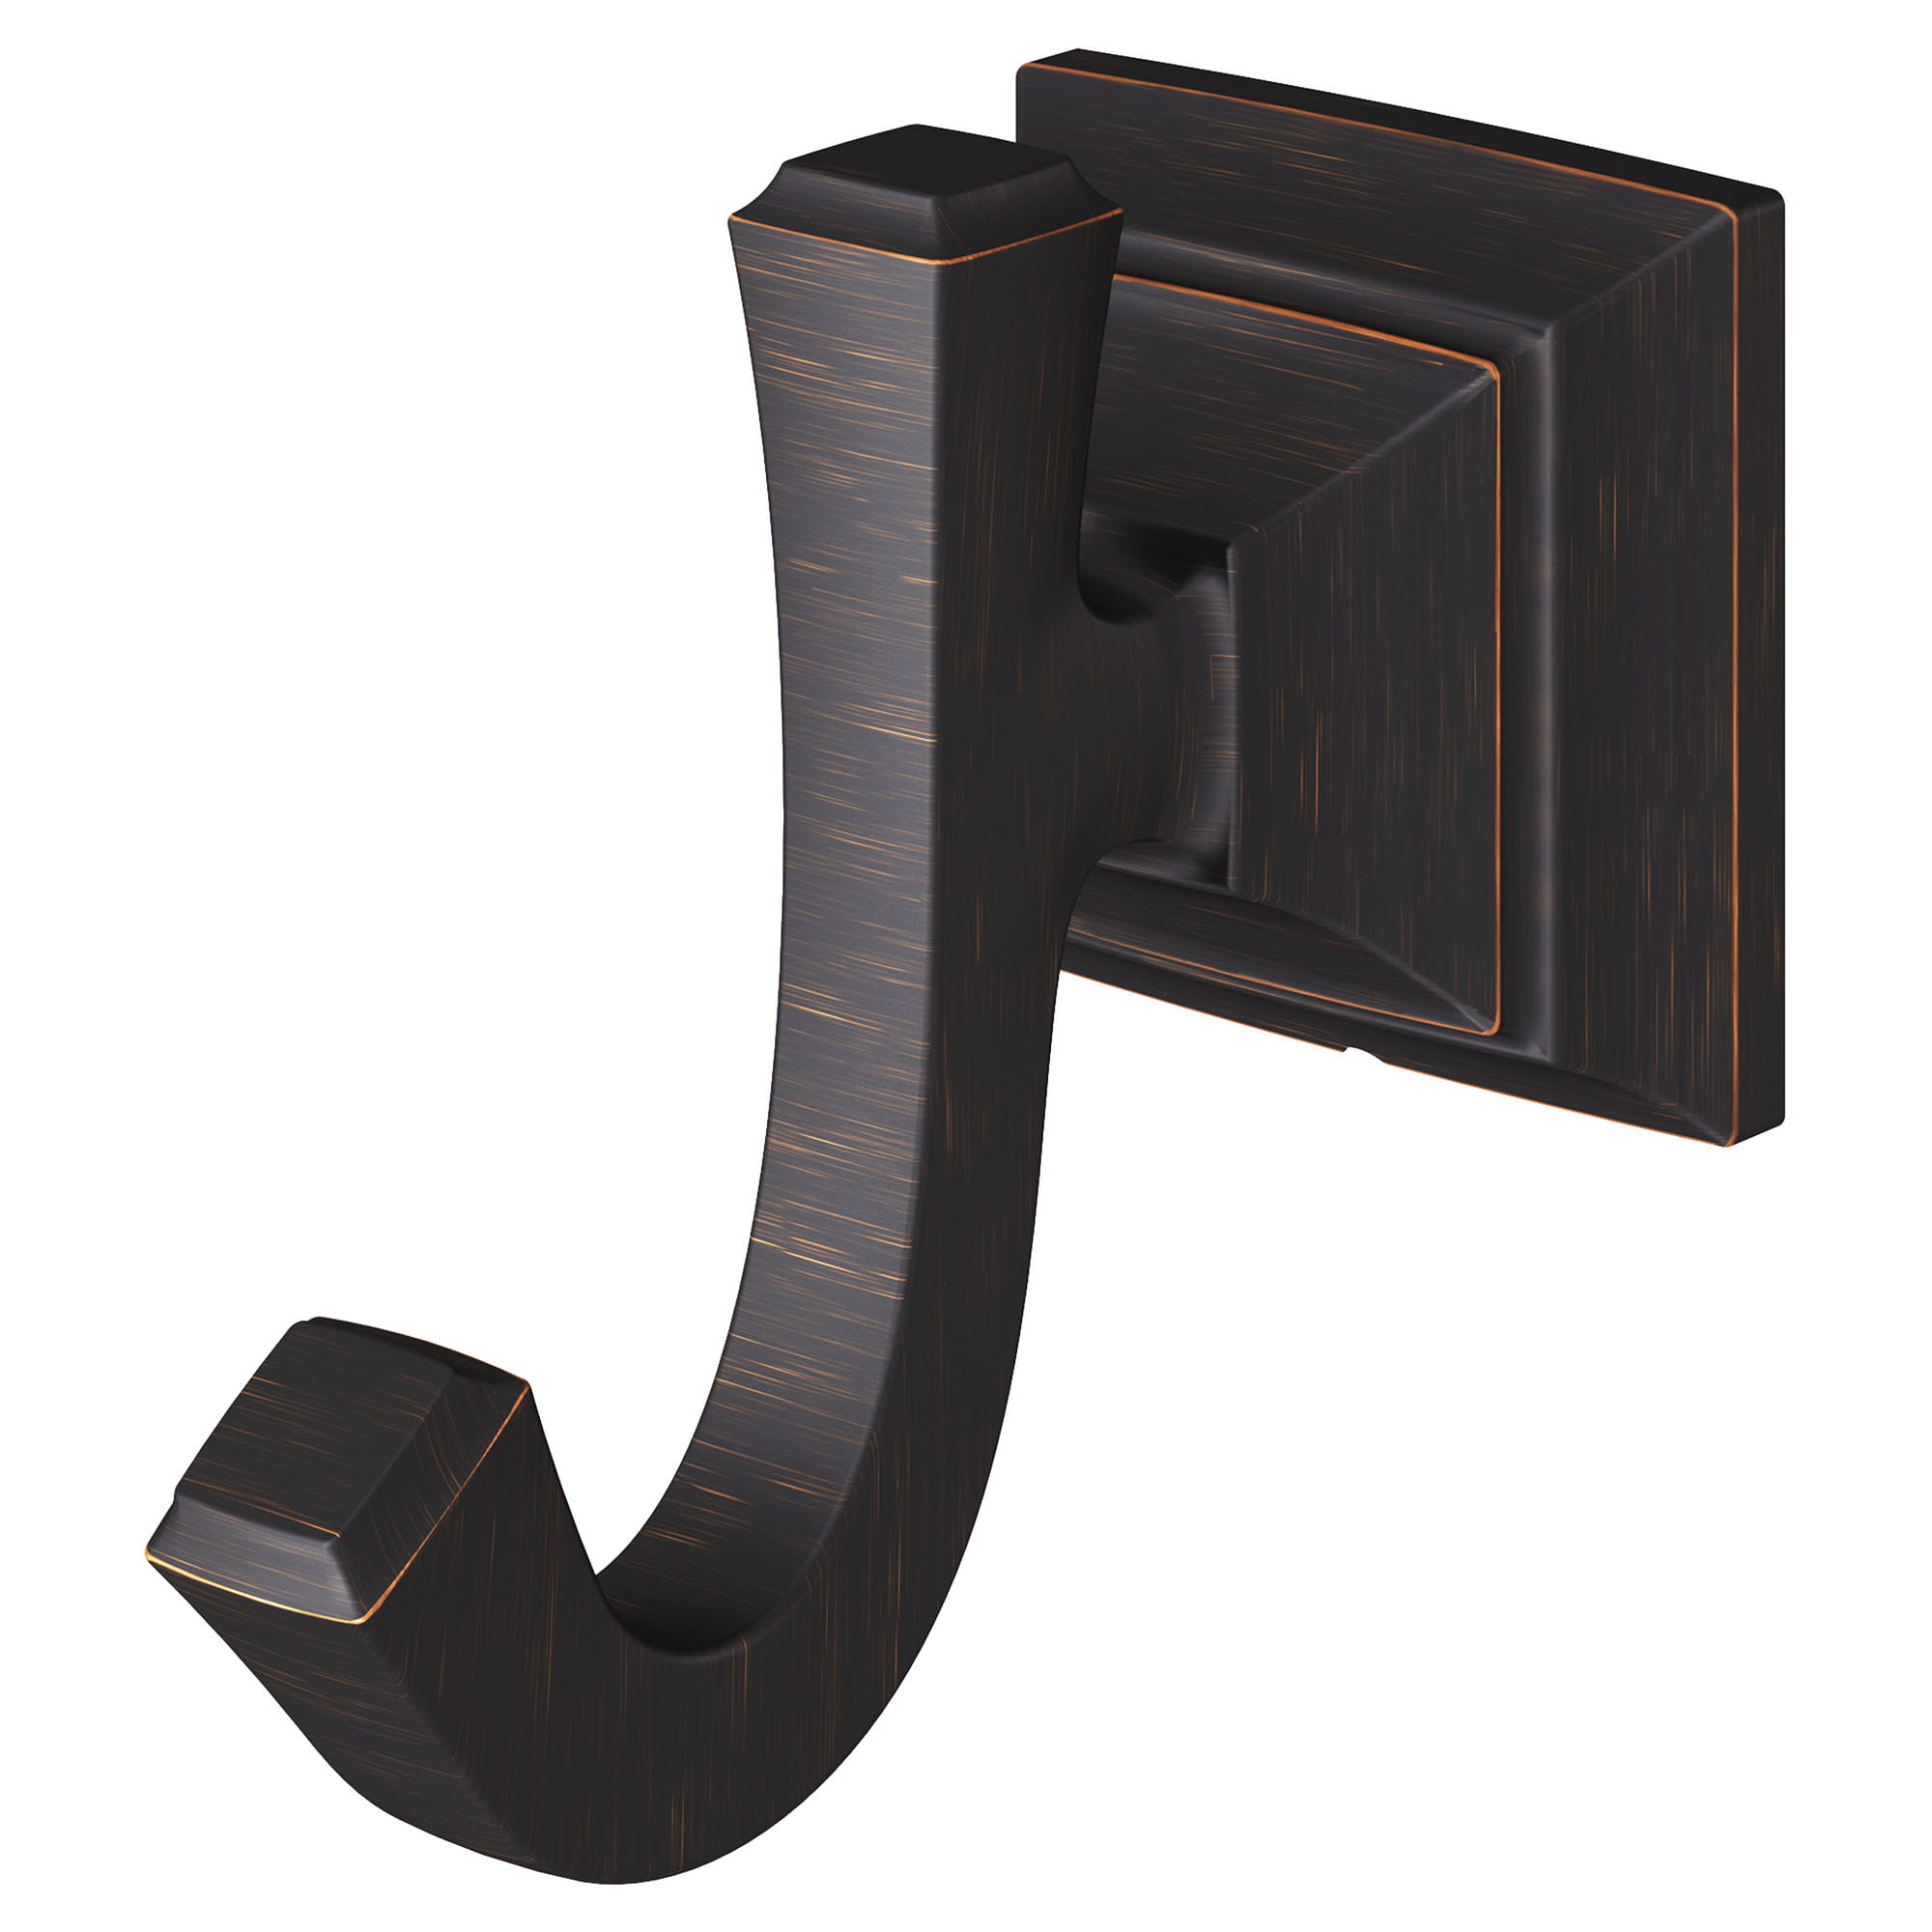 Town Square™ S Double Robe Hook